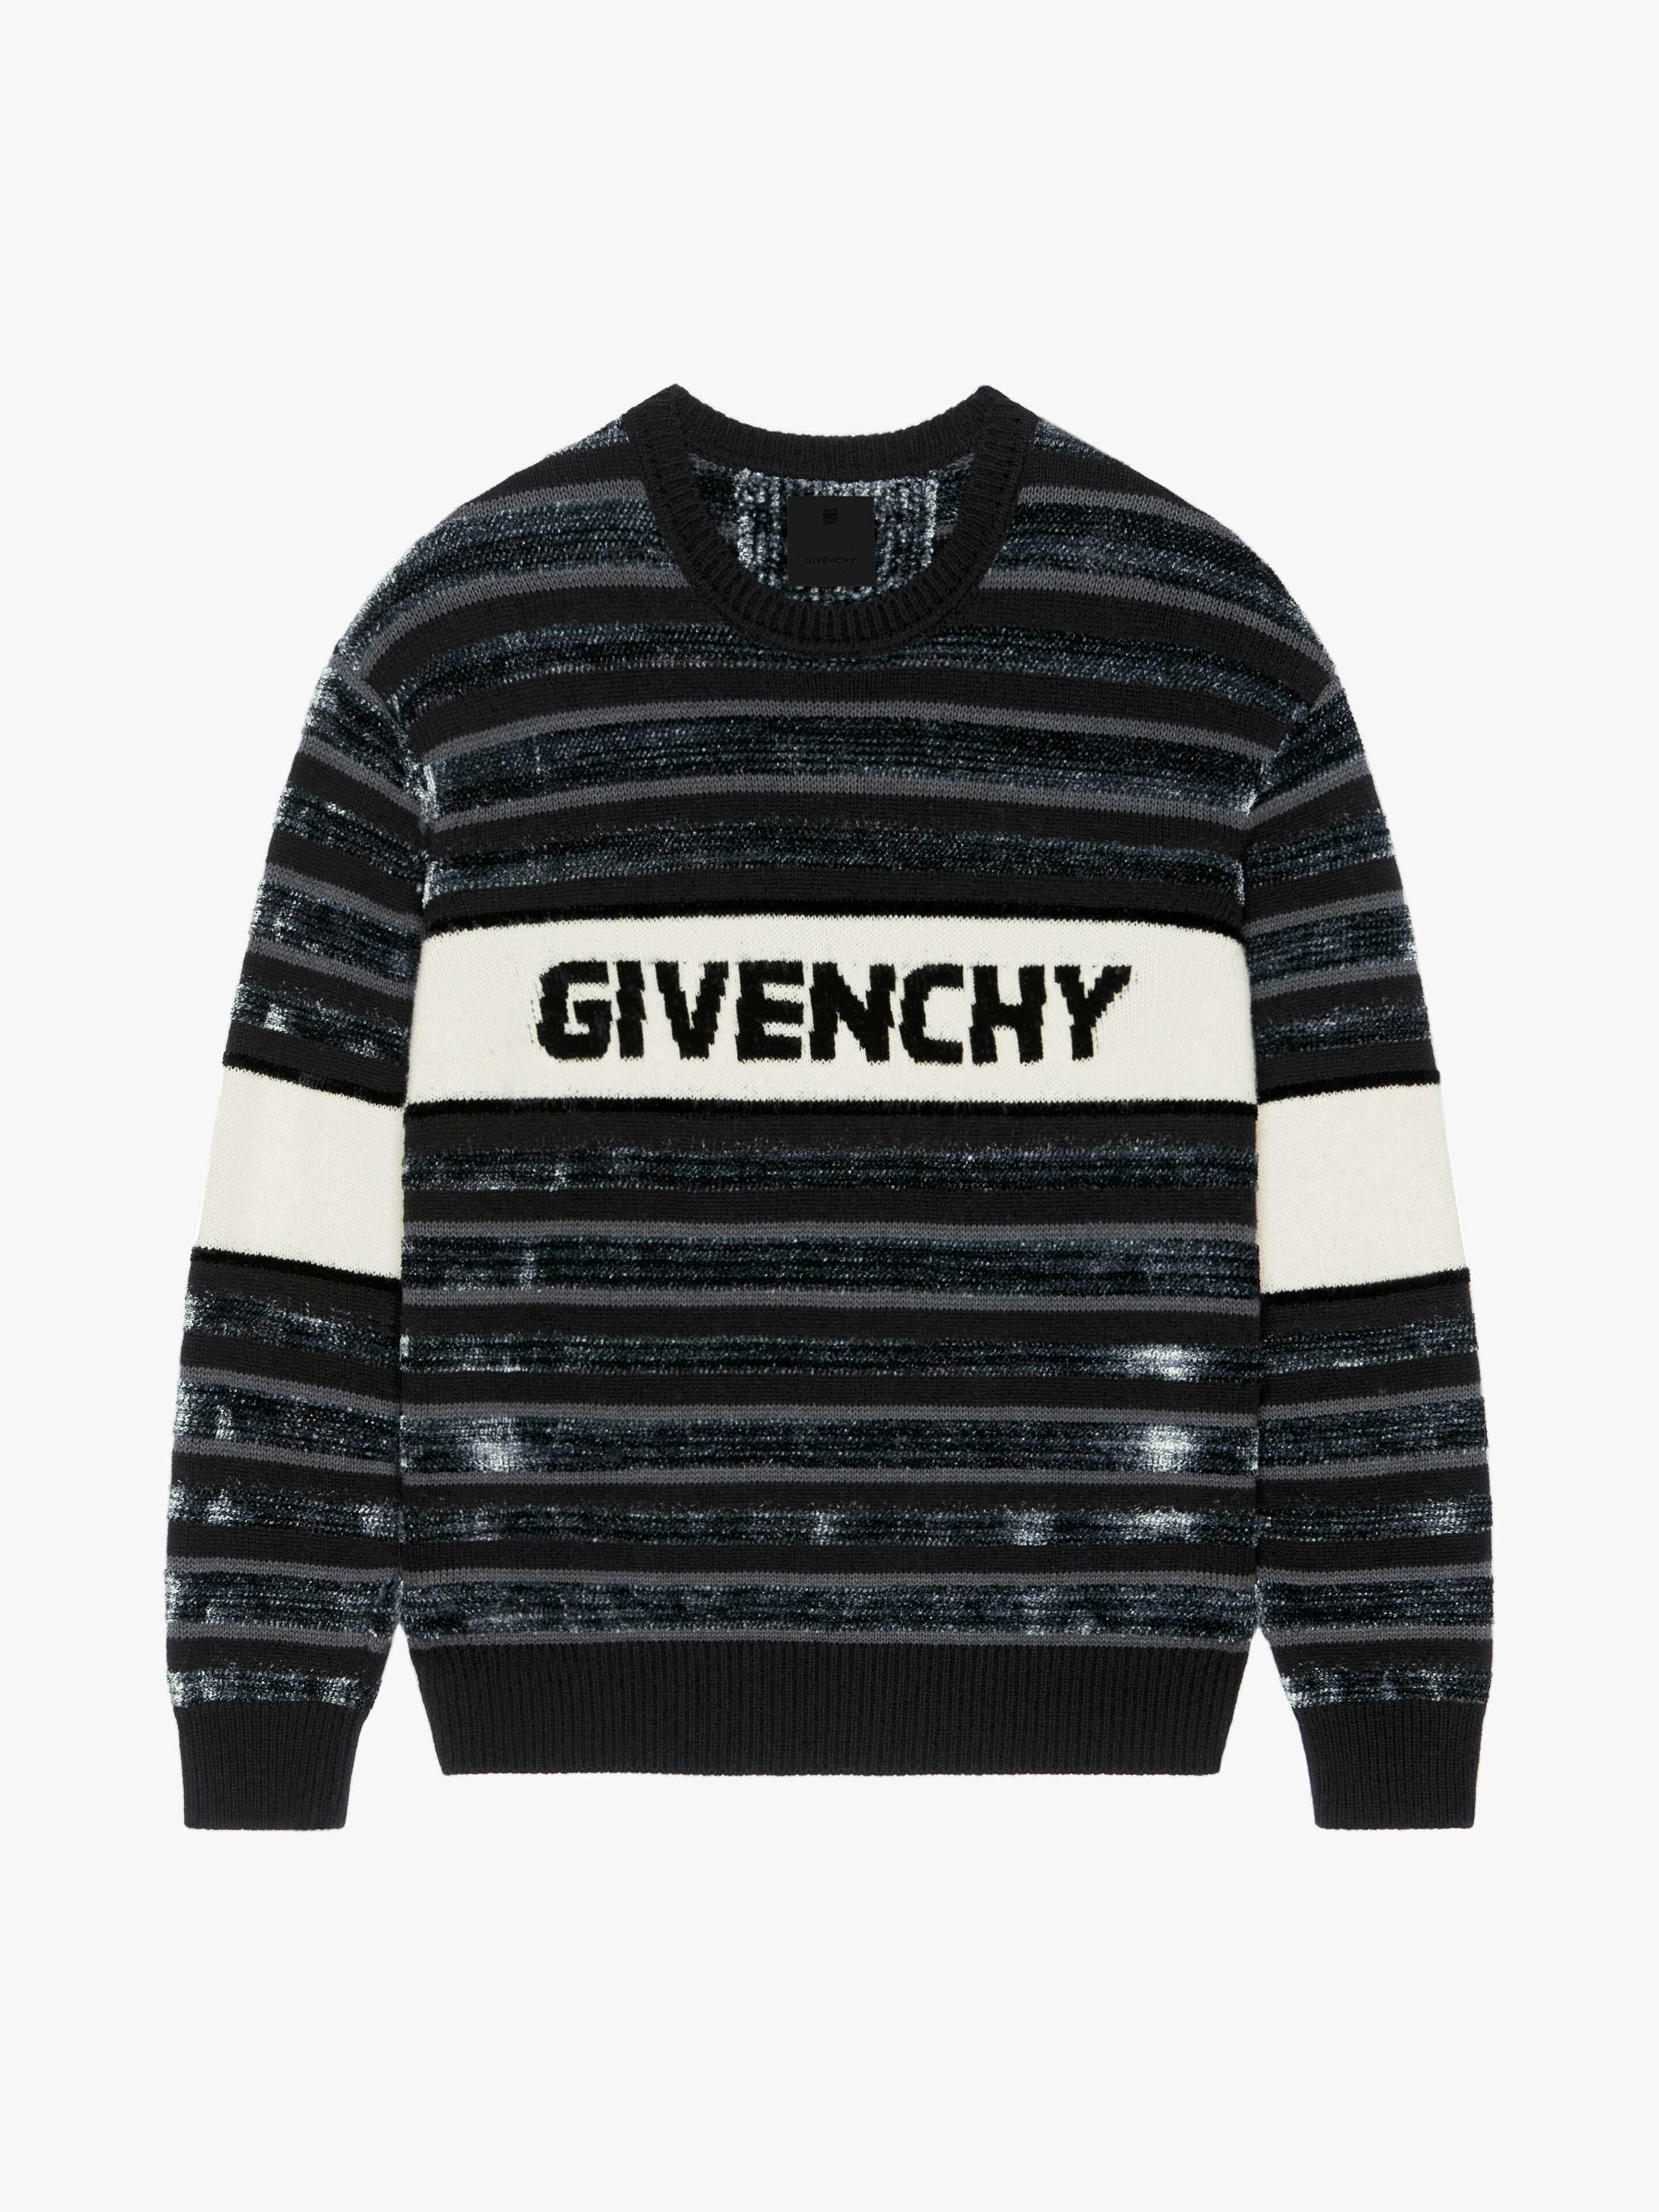 Givenchy Knitwear for Women sale - discounted price - Philippines